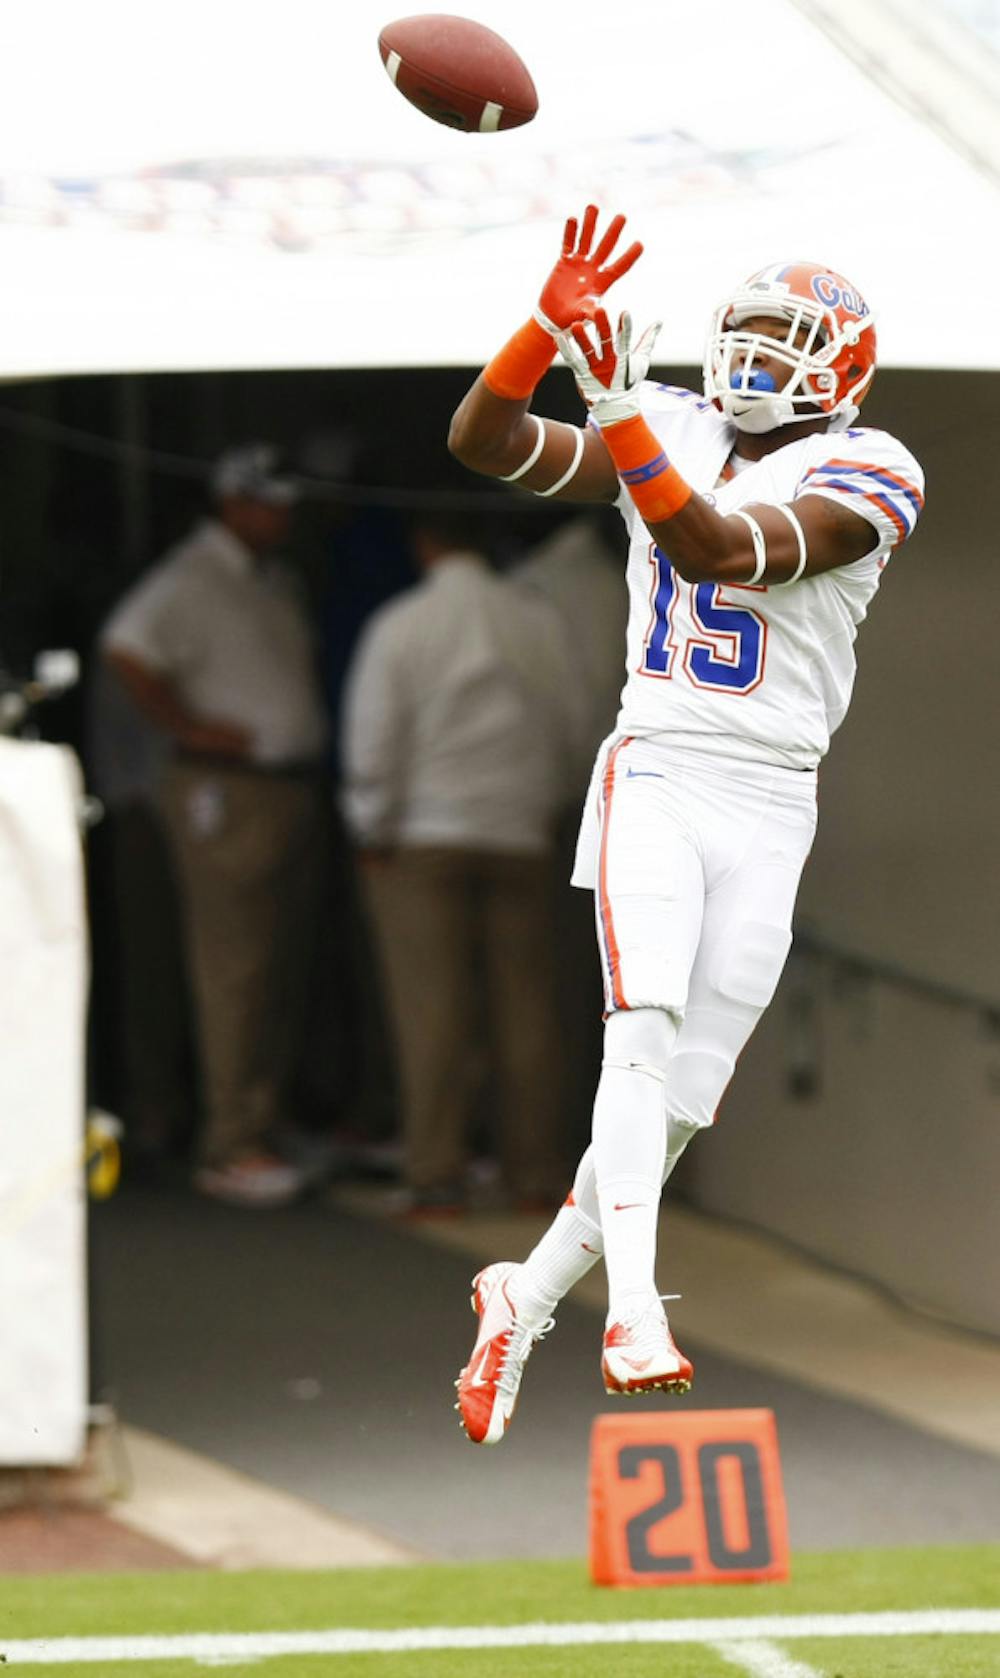 <p class="p1"><span class="s1">Loucheiz Purifoy (15) catches passes during warmups before Florida’s 17-9 loss to Georgia on Oct. 27 in Jacksonville.</span></p>